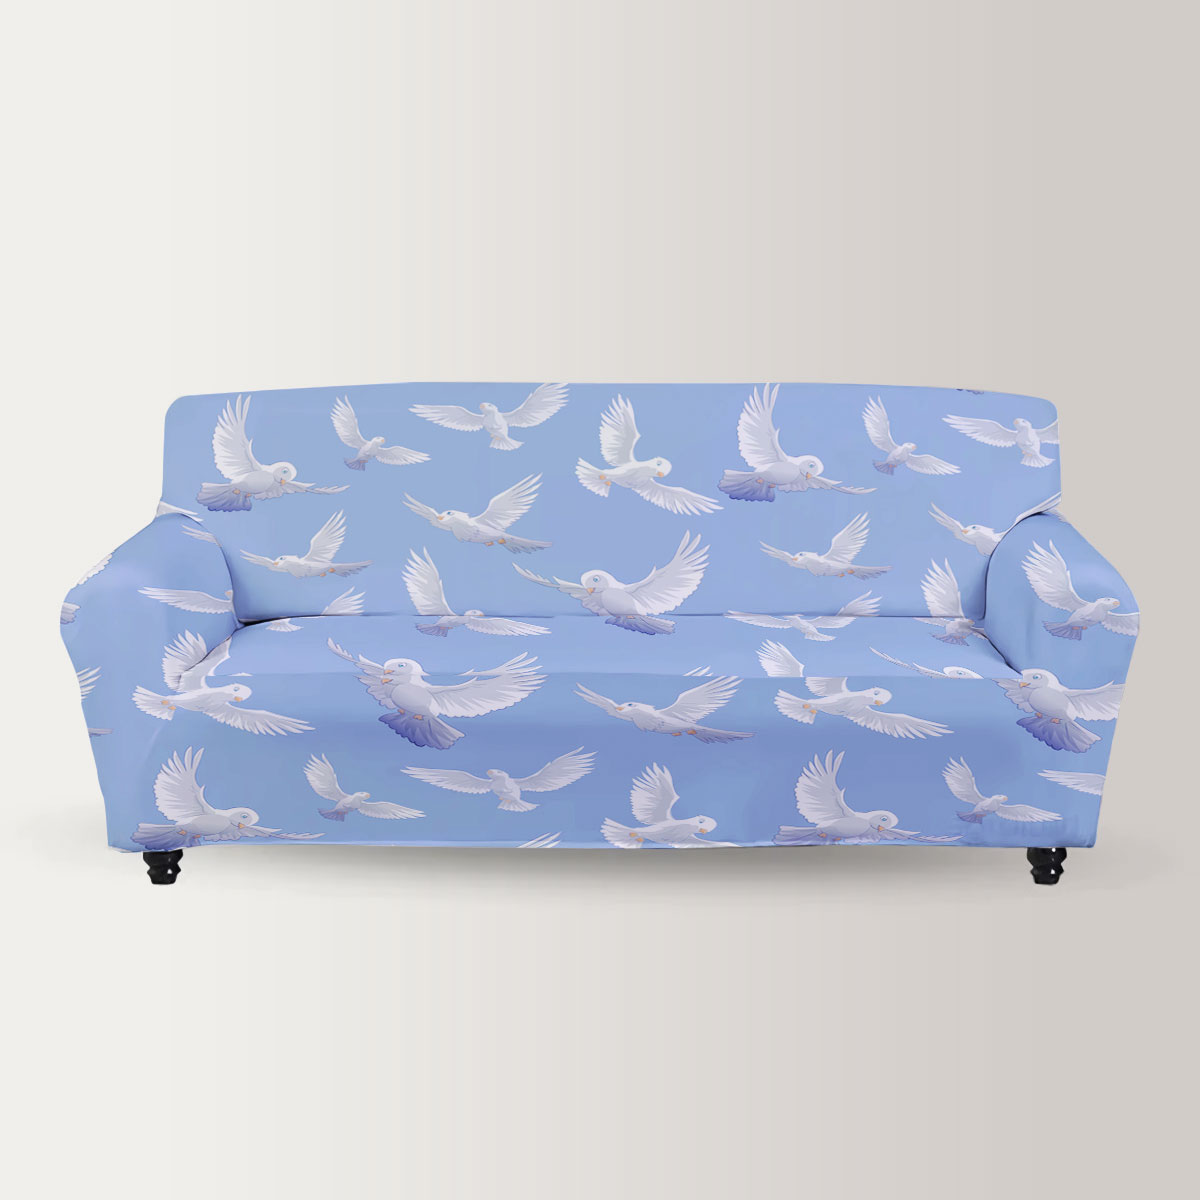 Flying White Pigeon Blue Sky Sofa Cover